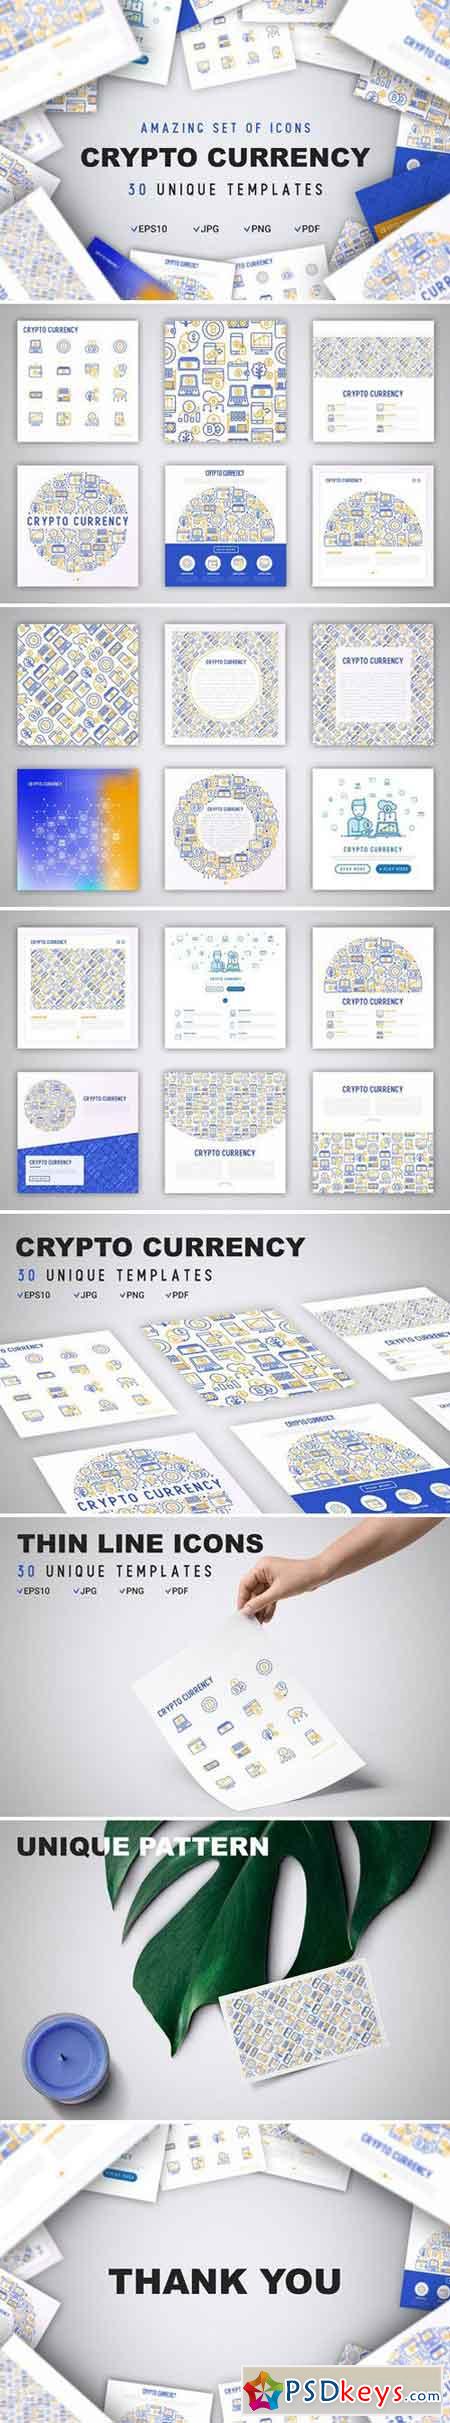 Crypto Currency Icons Set Concept 2112600